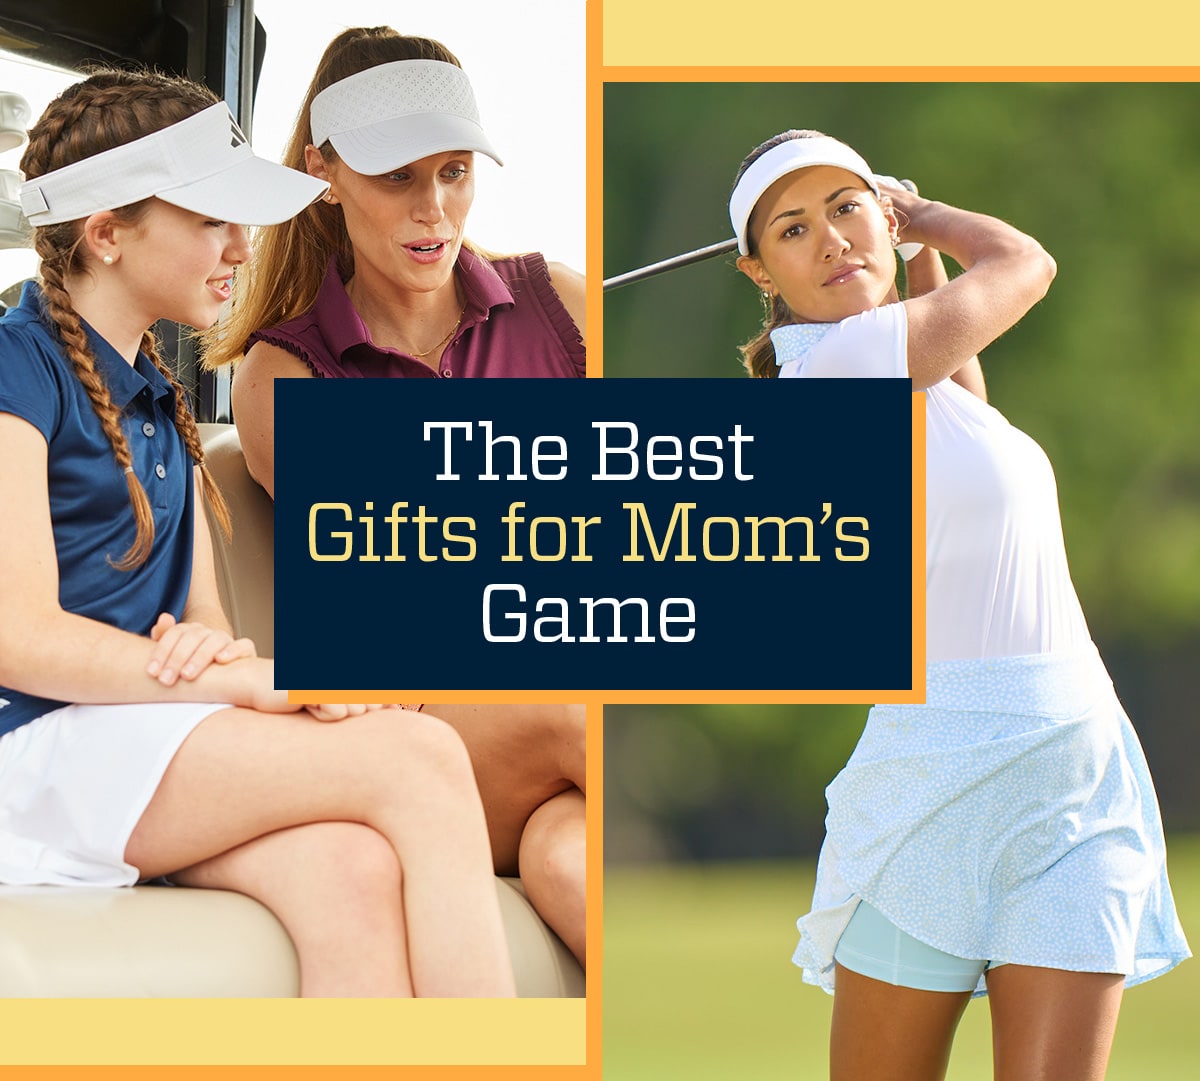 The best gift's for mom's game.